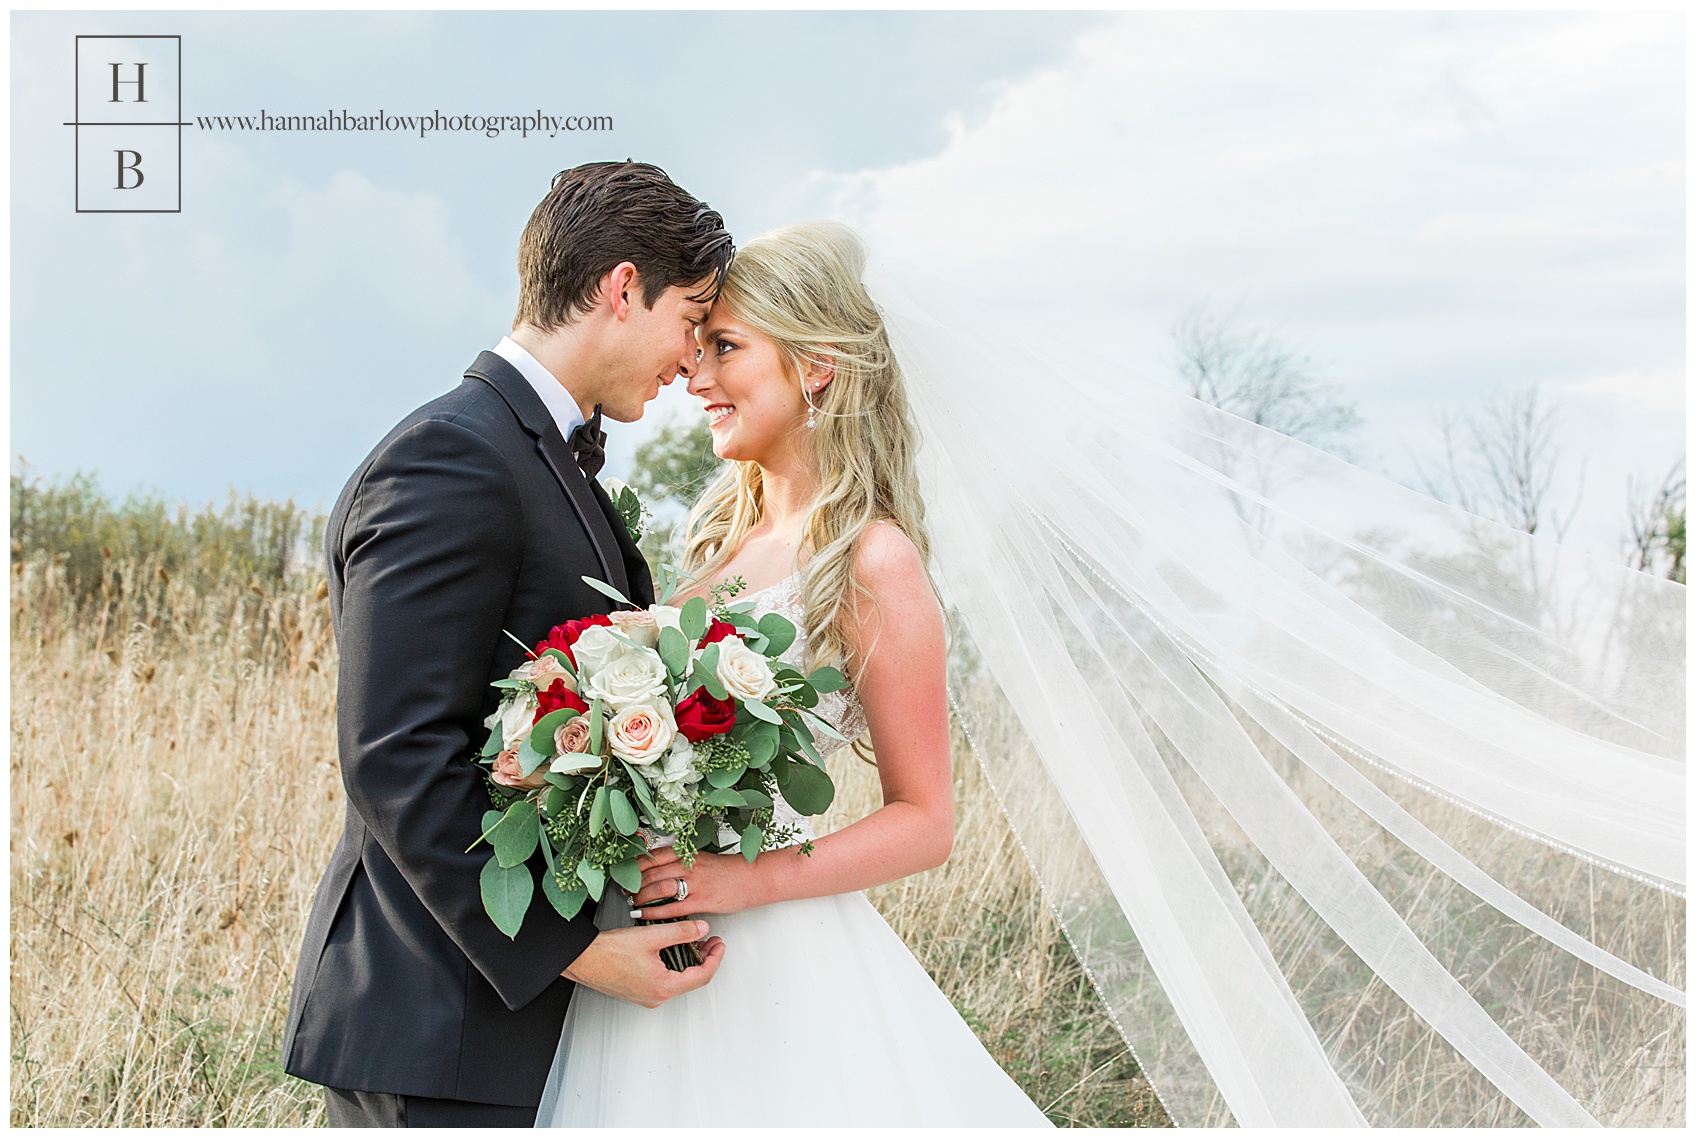 Bride and Groom Formal Photo in Field with Large Veil